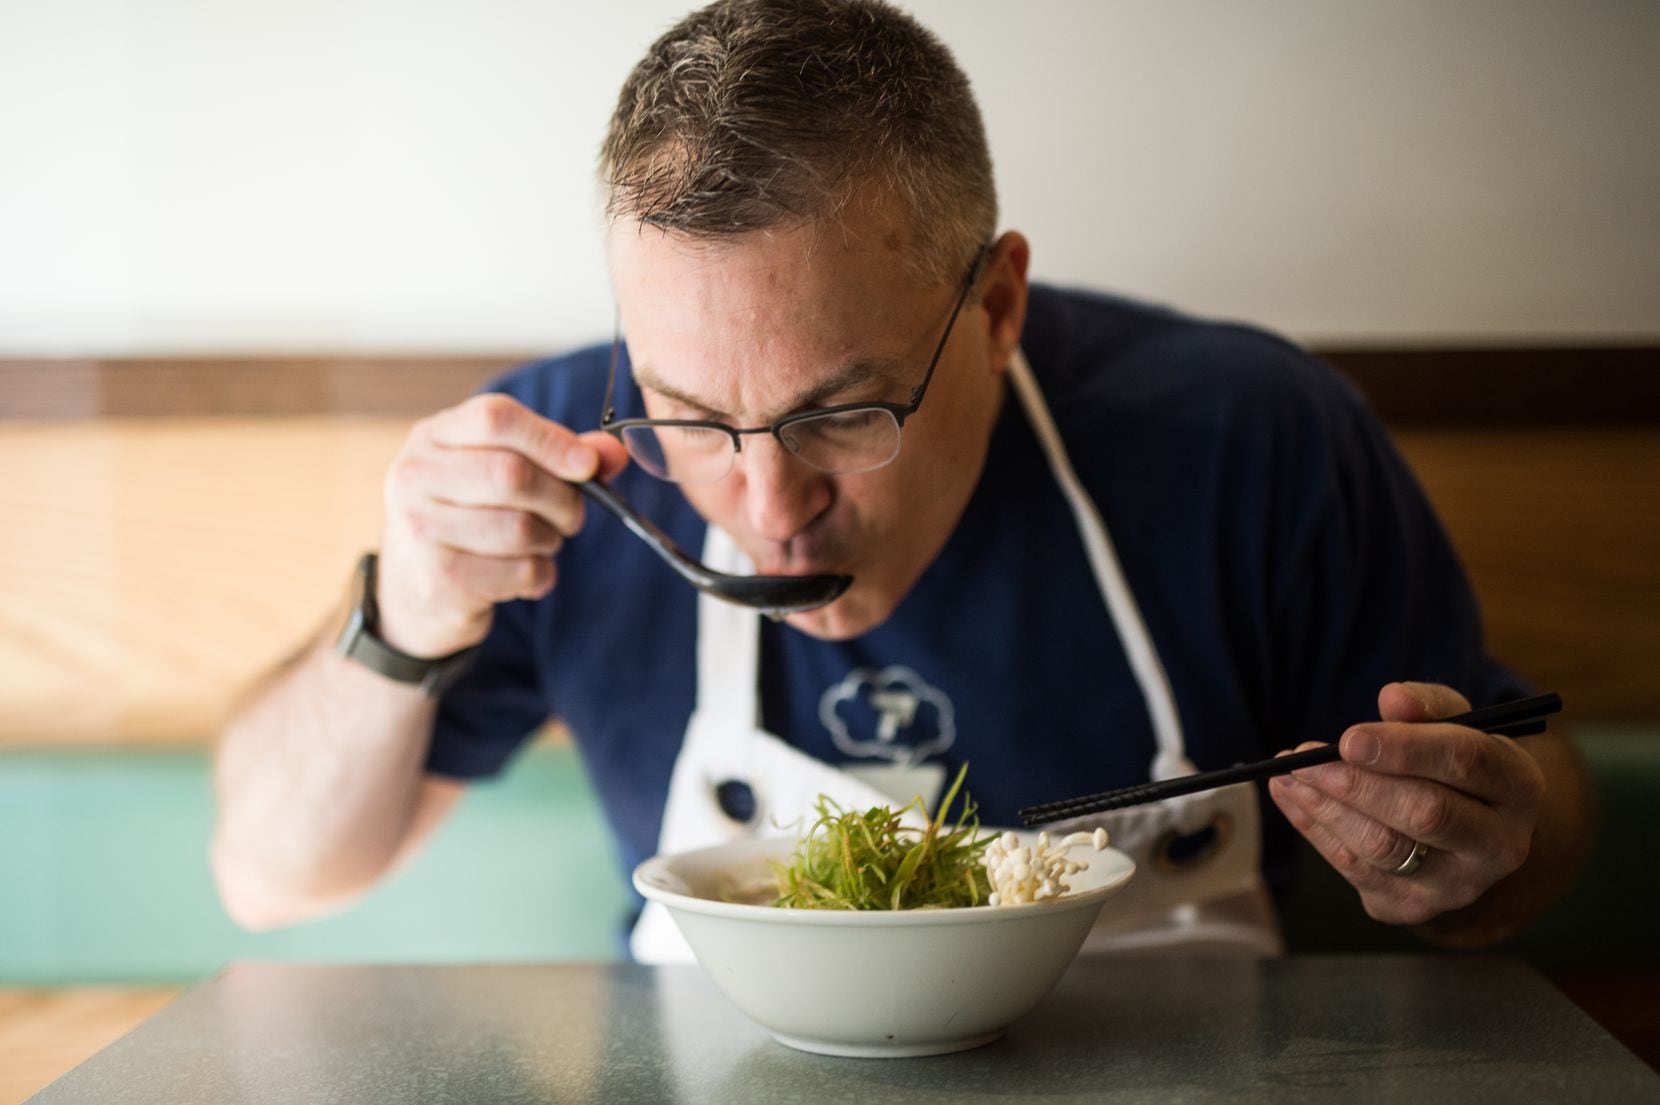 Chef Ivan Orkin opened his first ramen shop in Tokyo. "This move seemed destined for failure...